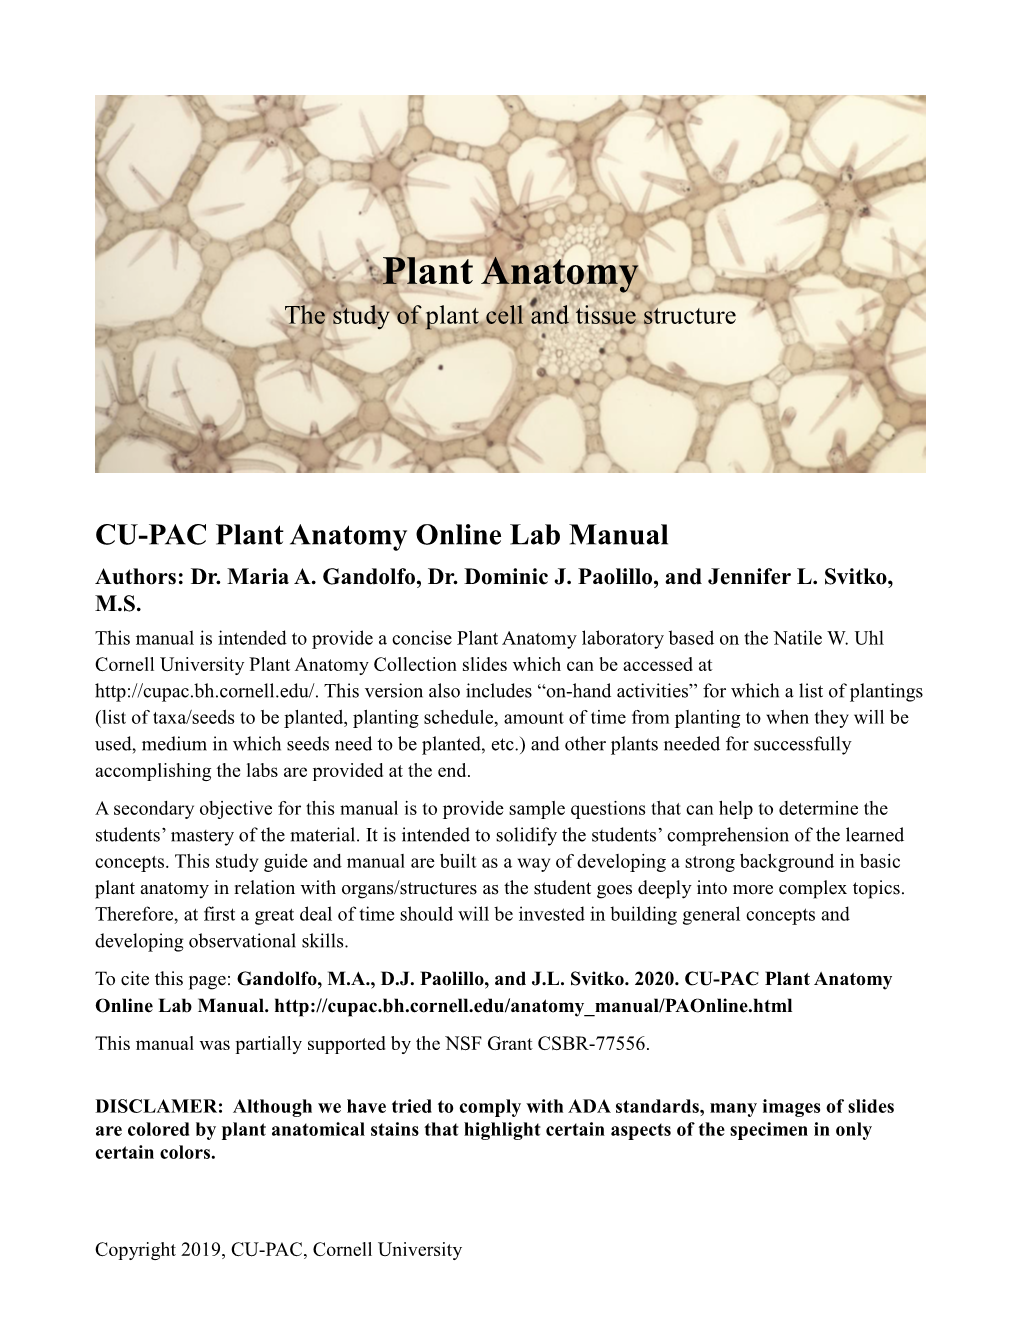 Plant Anatomy the Study of Plant Cell and Tissue Structure